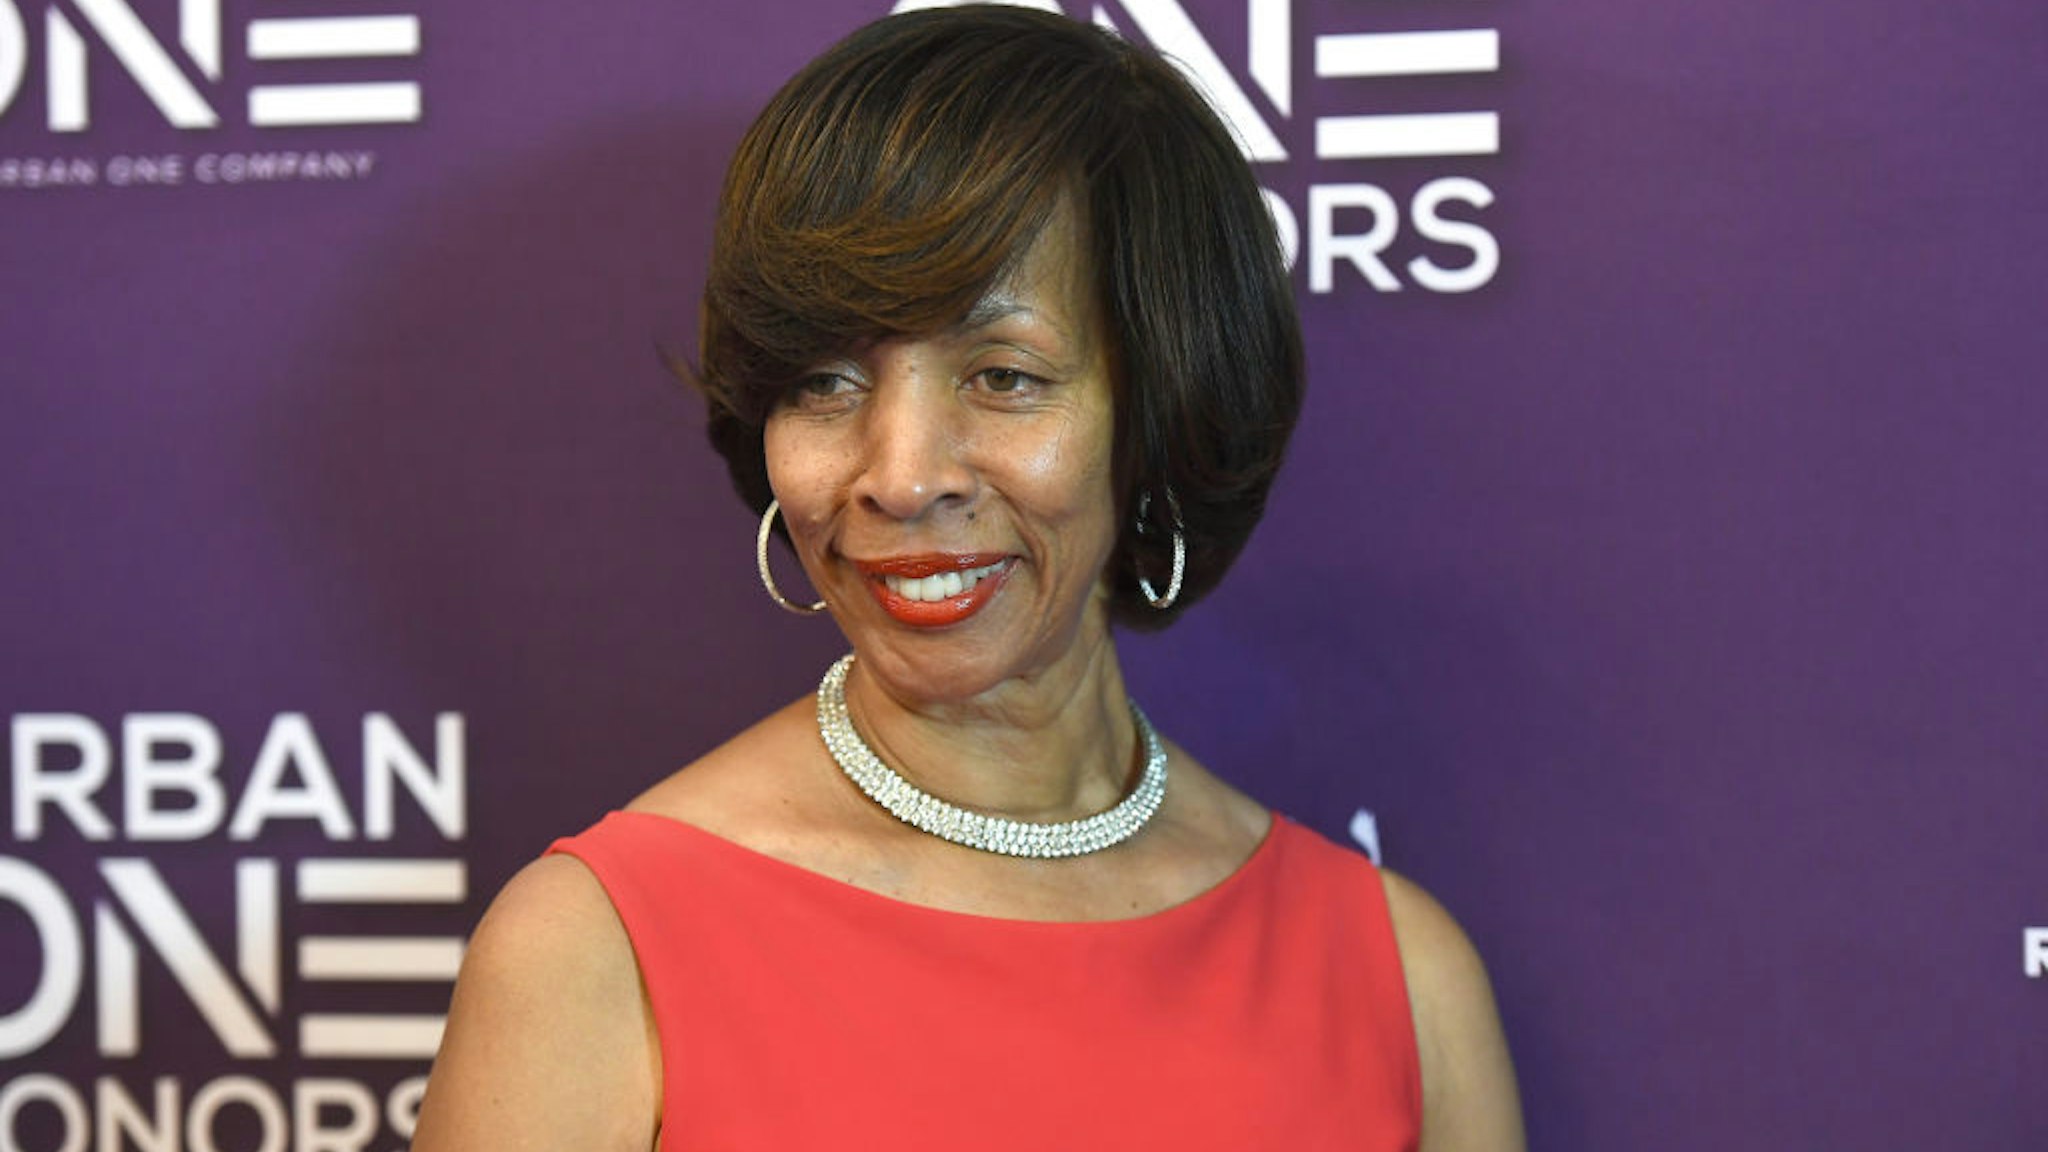 Baltimore mayor Catherine Pugh attends 2018 Urban One Honors at La Vie on December 9, 2018 in Washington, DC.